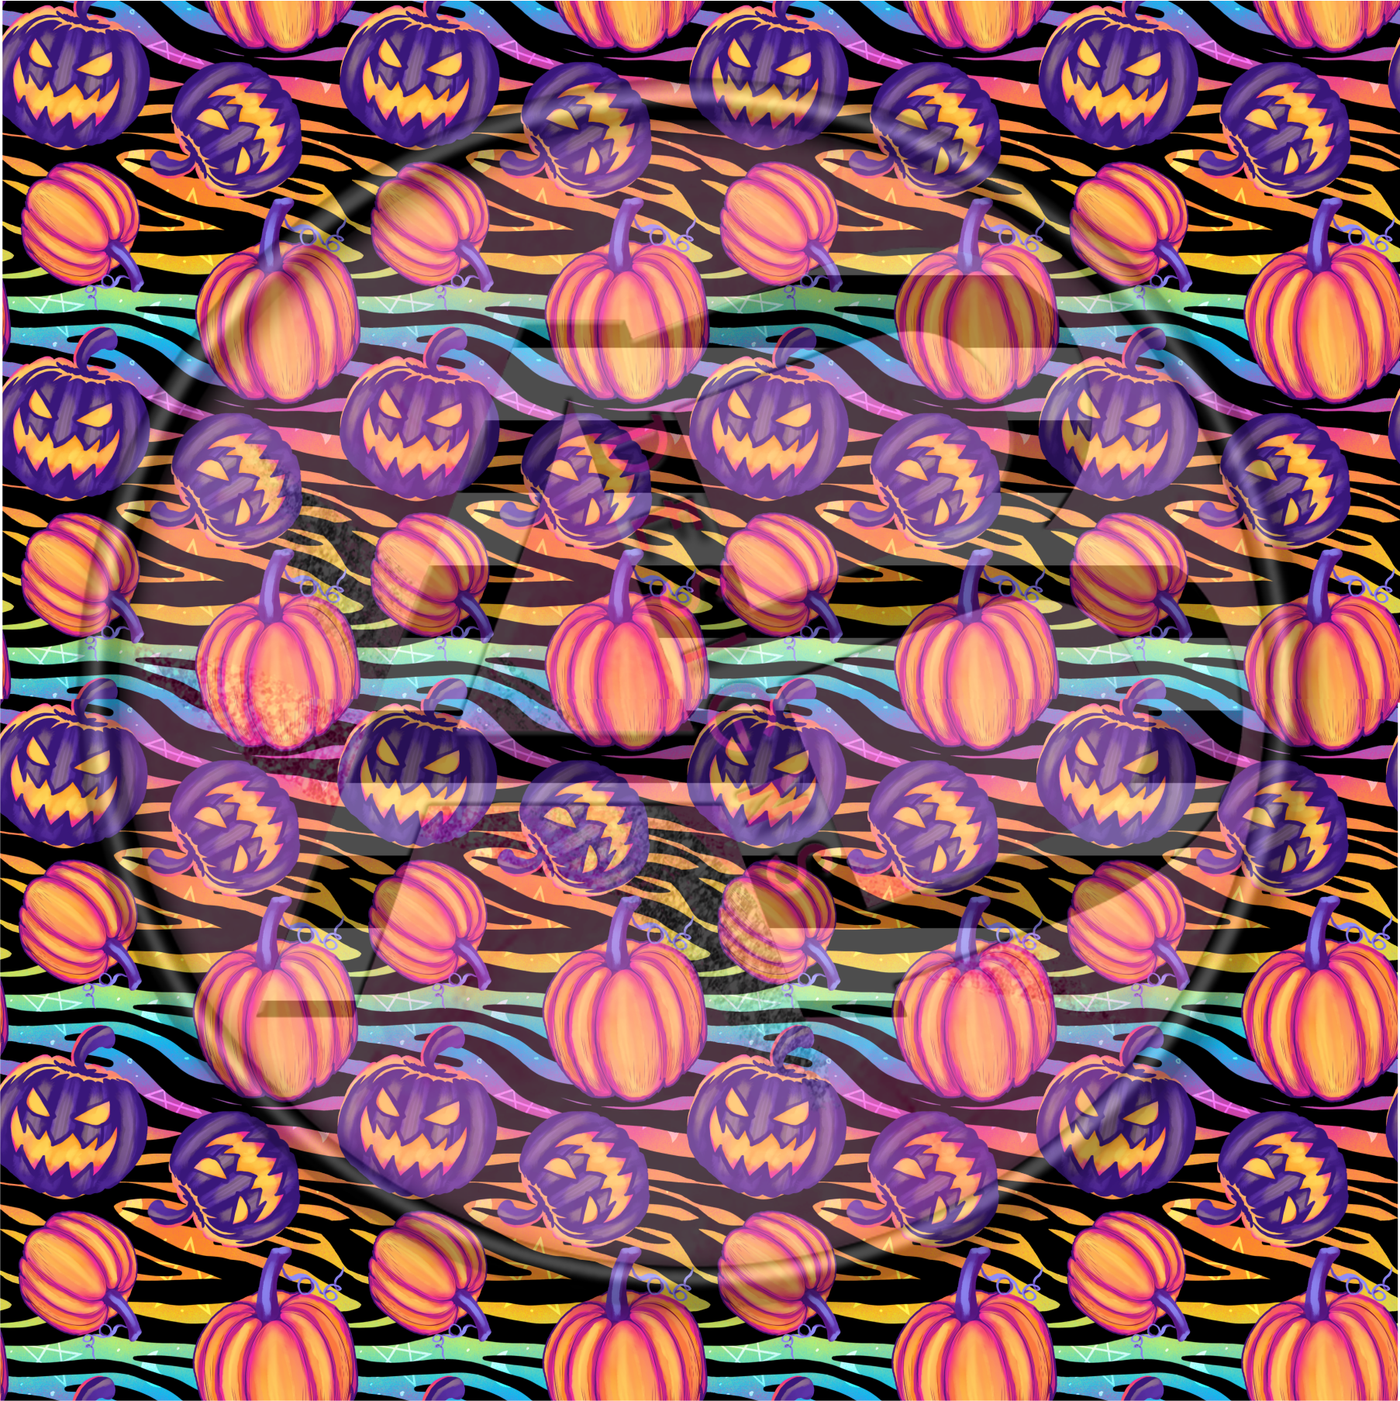 Adhesive Patterned Vinyl - Pumpkin Patch 01 SMALLER